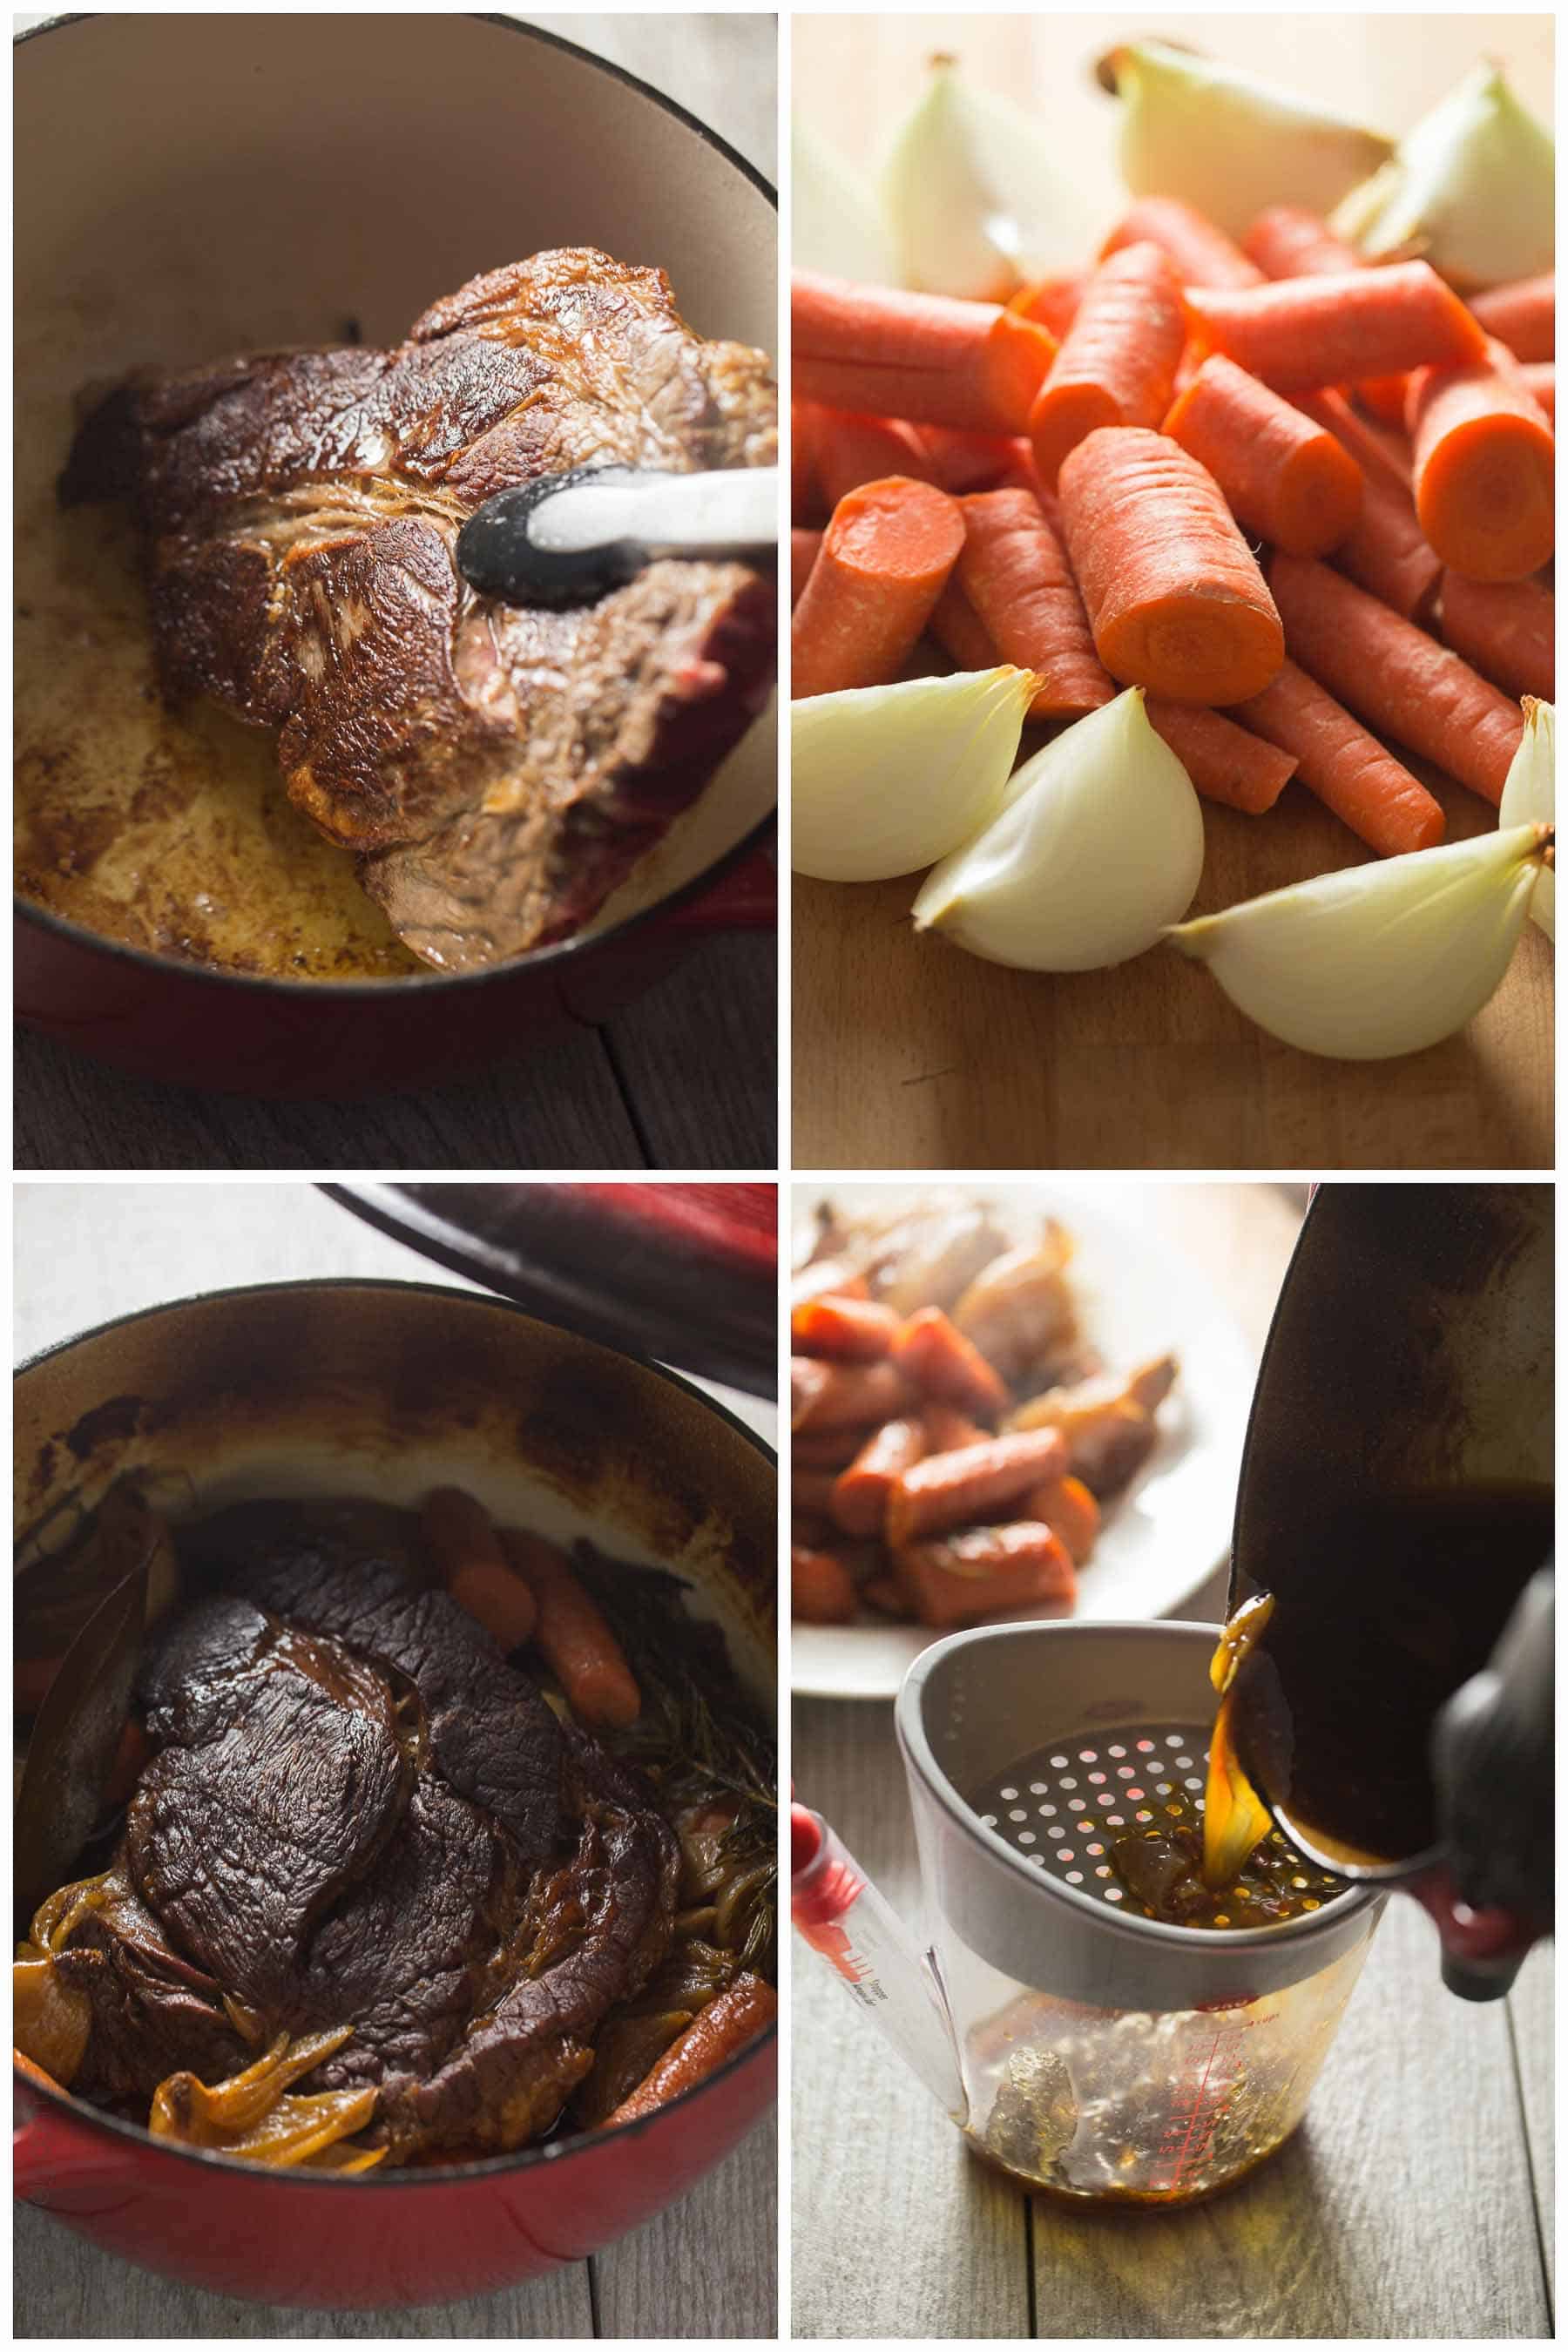 Paleo Pot Roast with Gravy - the most flavorful and juicy pot roast slow roasted in the oven. You would never guess it is dairy free, flour free, gluten free, and Whole30!